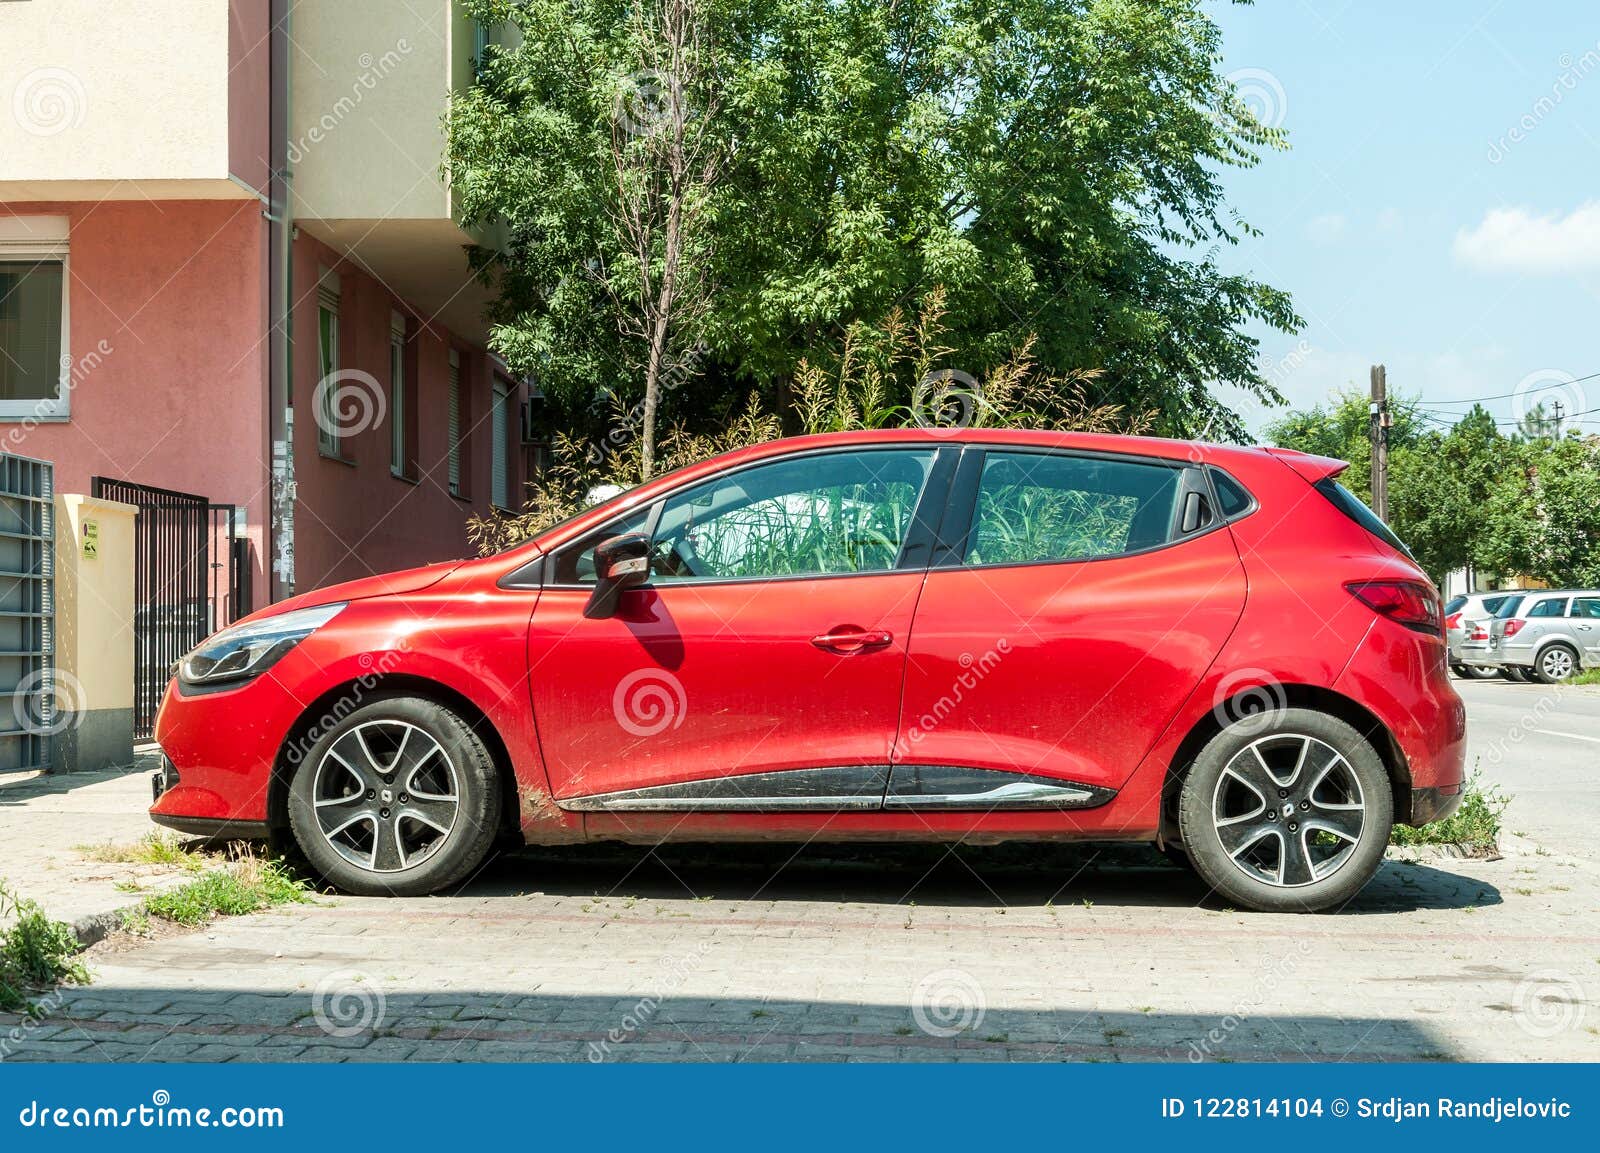 New Red Renault Clio IV Car with Alloy Wheels Parked on the Street in the City. Editorial Image - Image of classic, town: 122814104